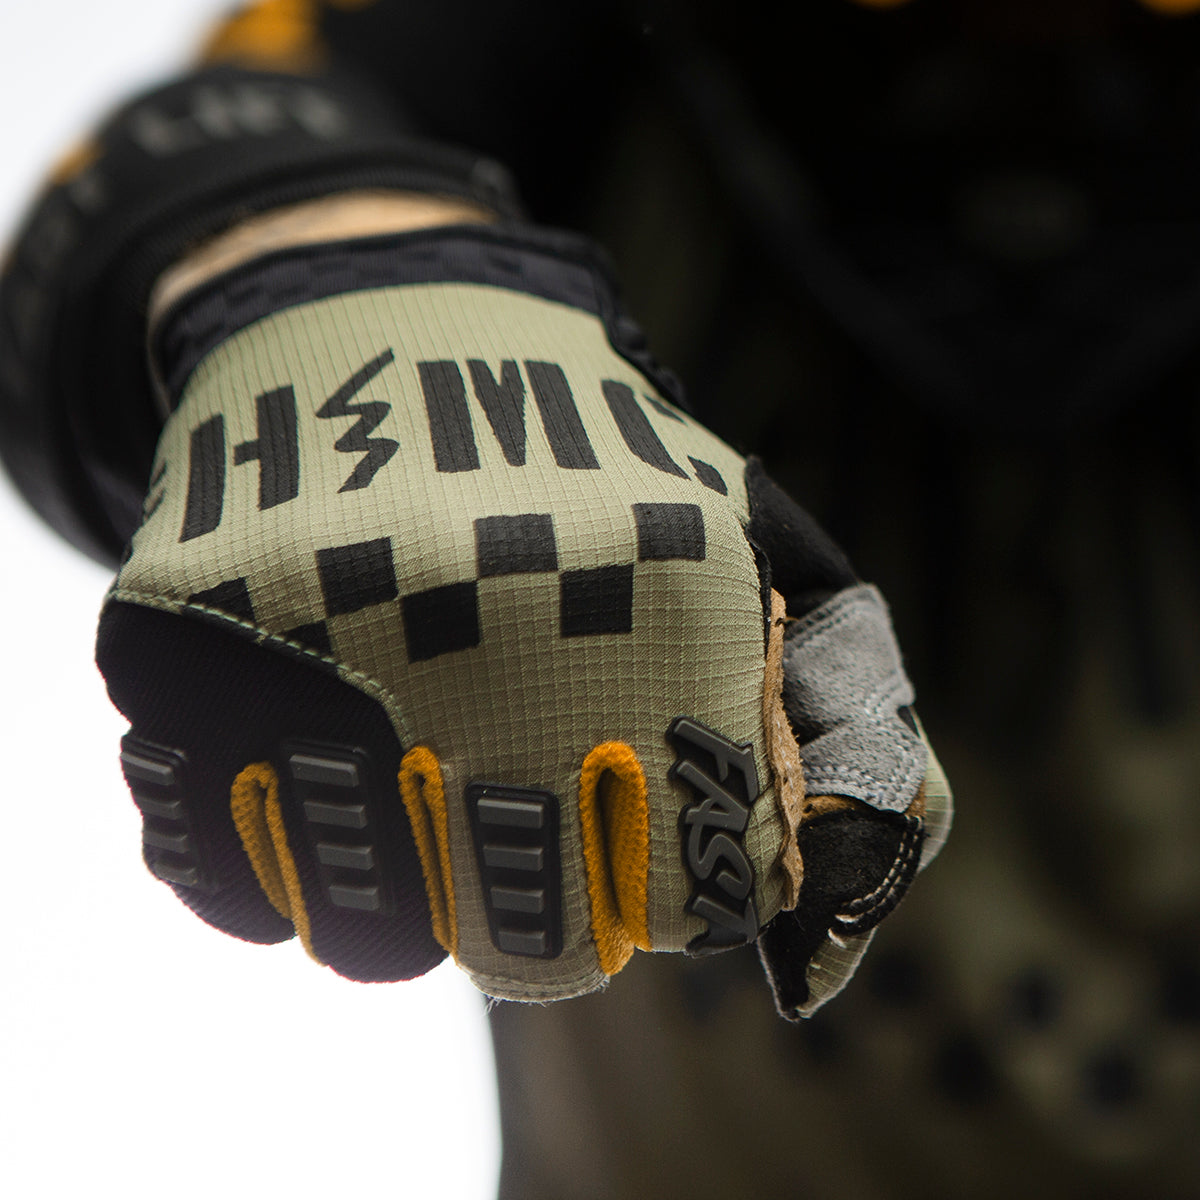 Off-Road Speed Style Charge Glove - Dusty Olive